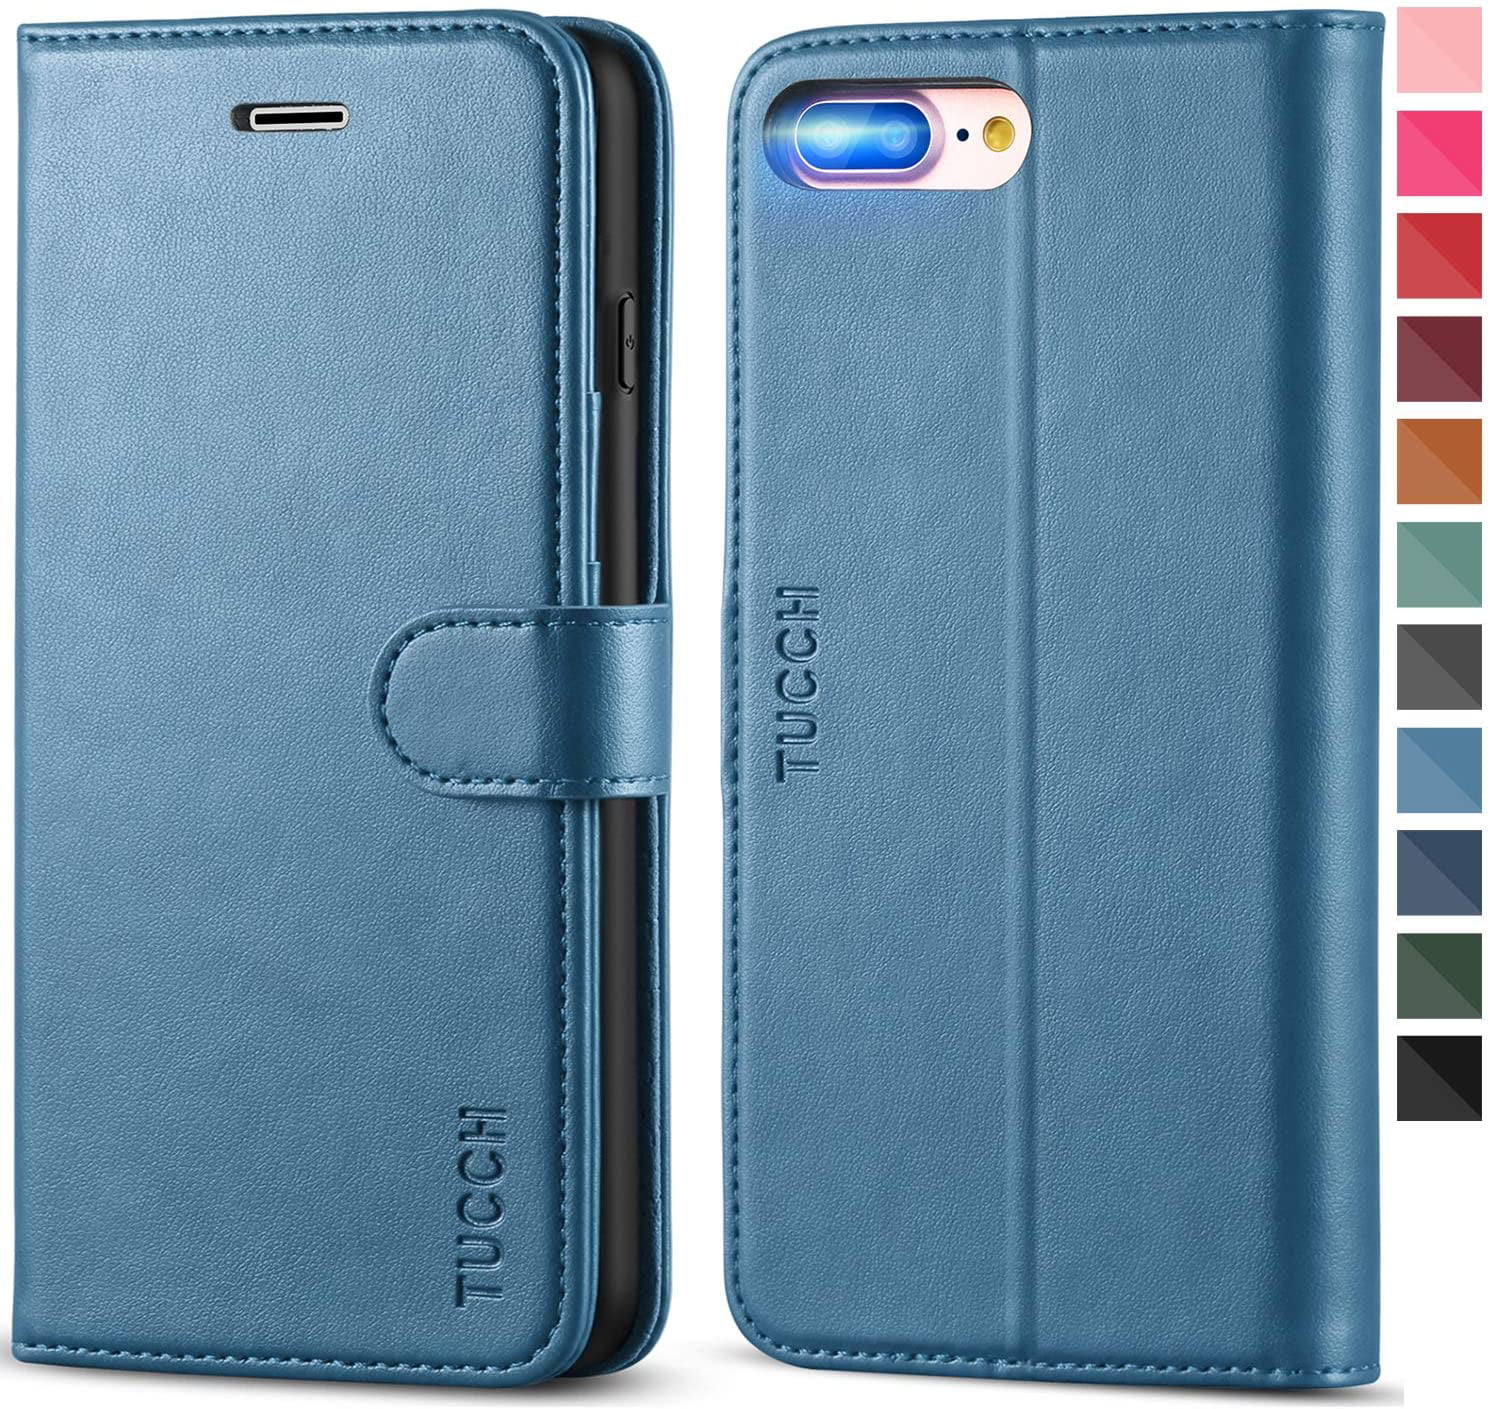 Cover for iPhone 7 Leather Card Holders Cell Phone Cover Kickstand Extra-Durable Business iPhone 7 Flip Case